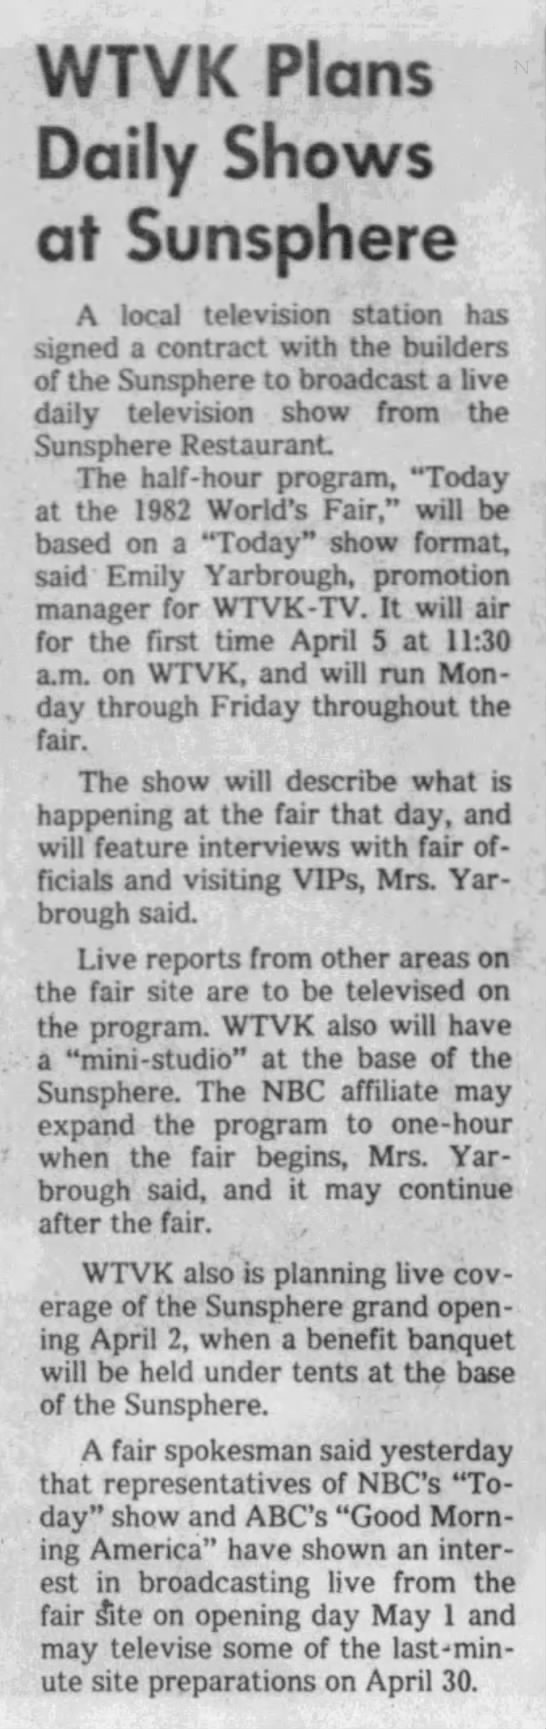 WTVK Plans Daily Shows at Sunsphere - 